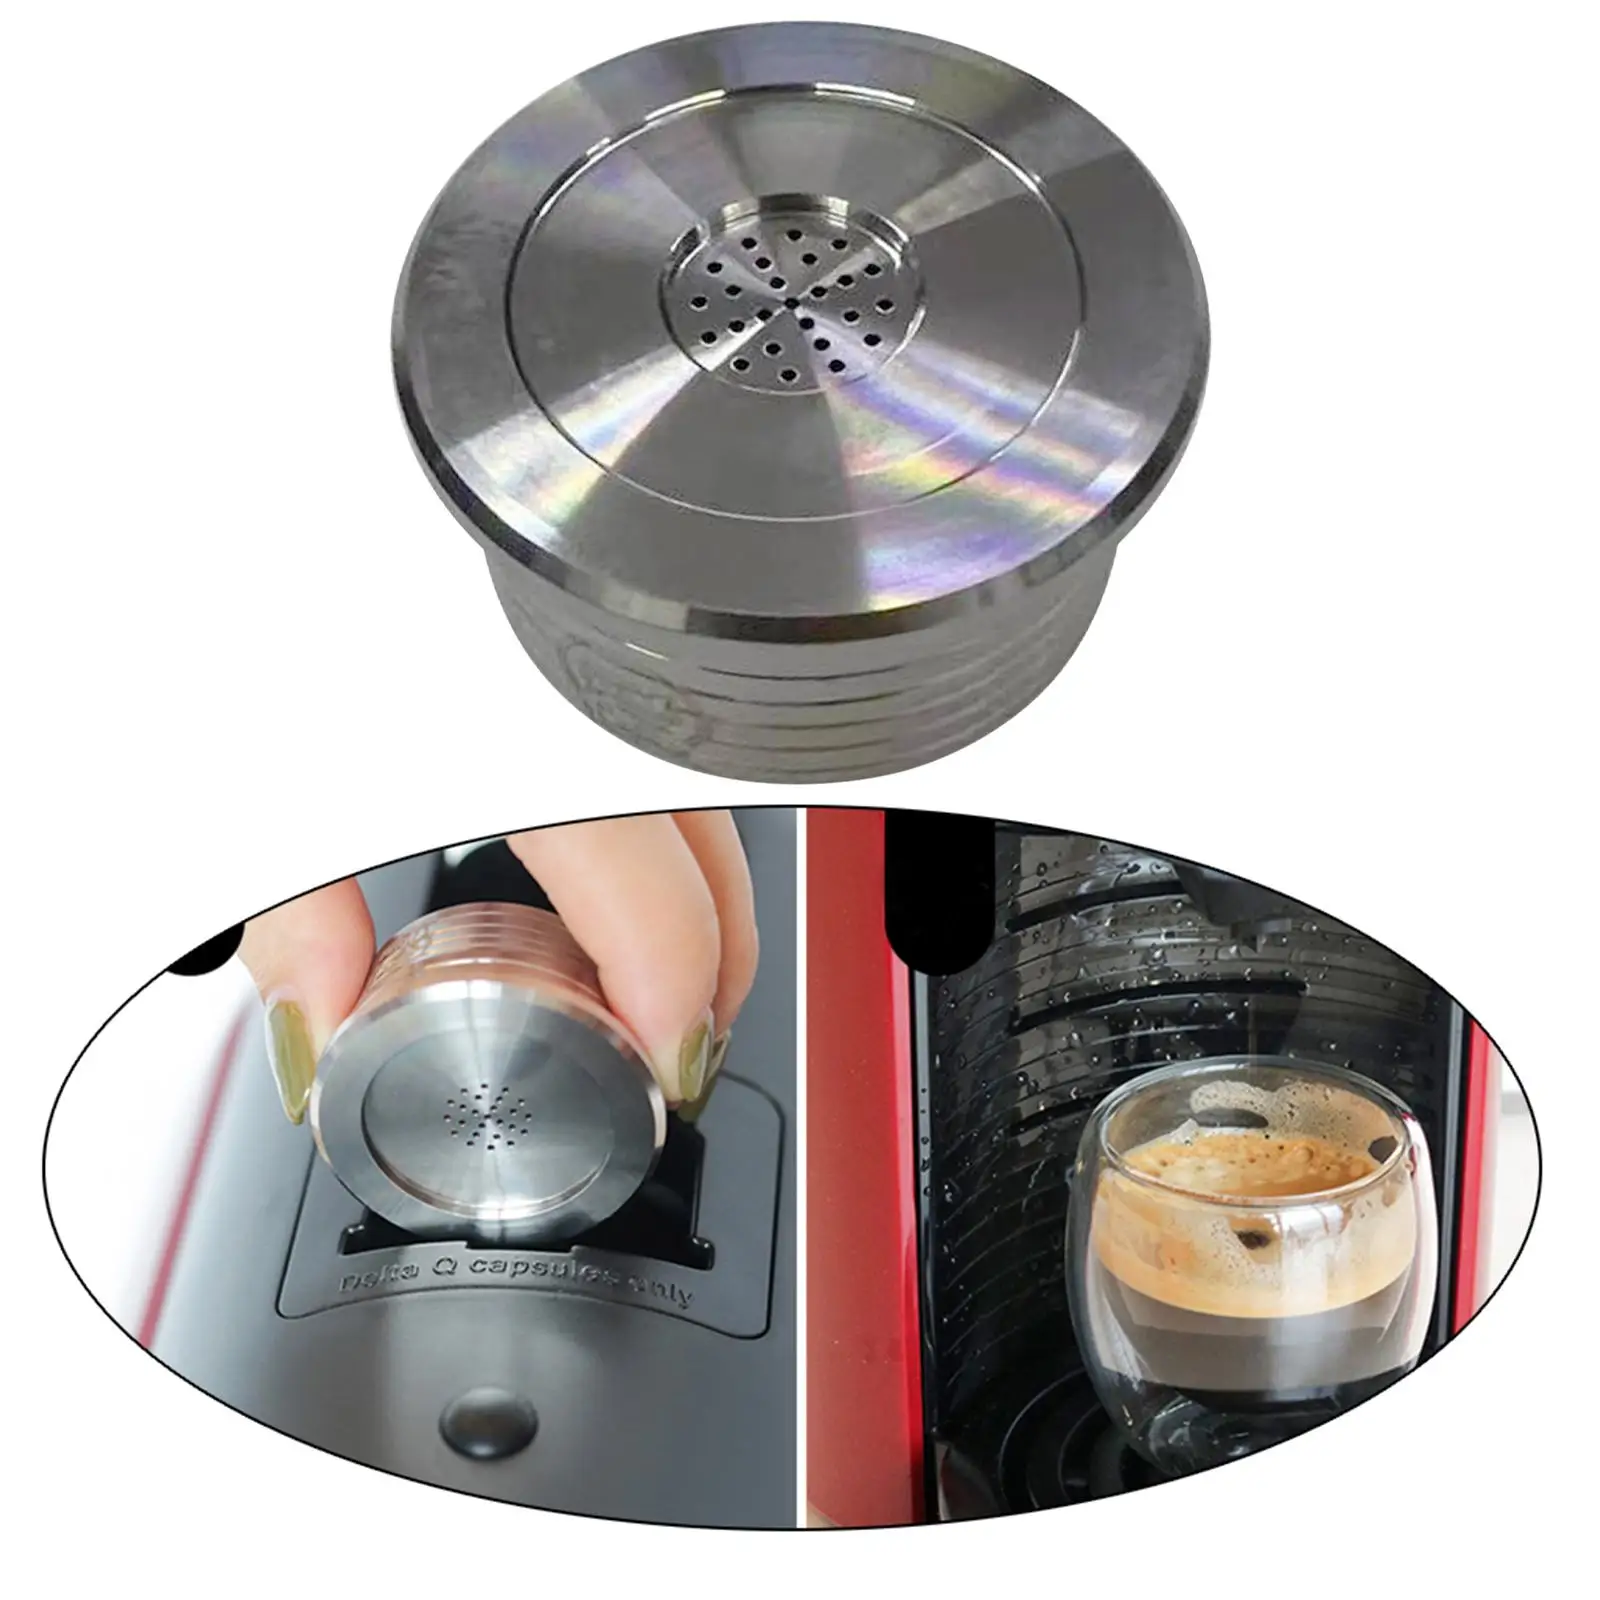 

Reusable Stainless Metal Coffee Capsule Filter Holder 20ml for Delta Q